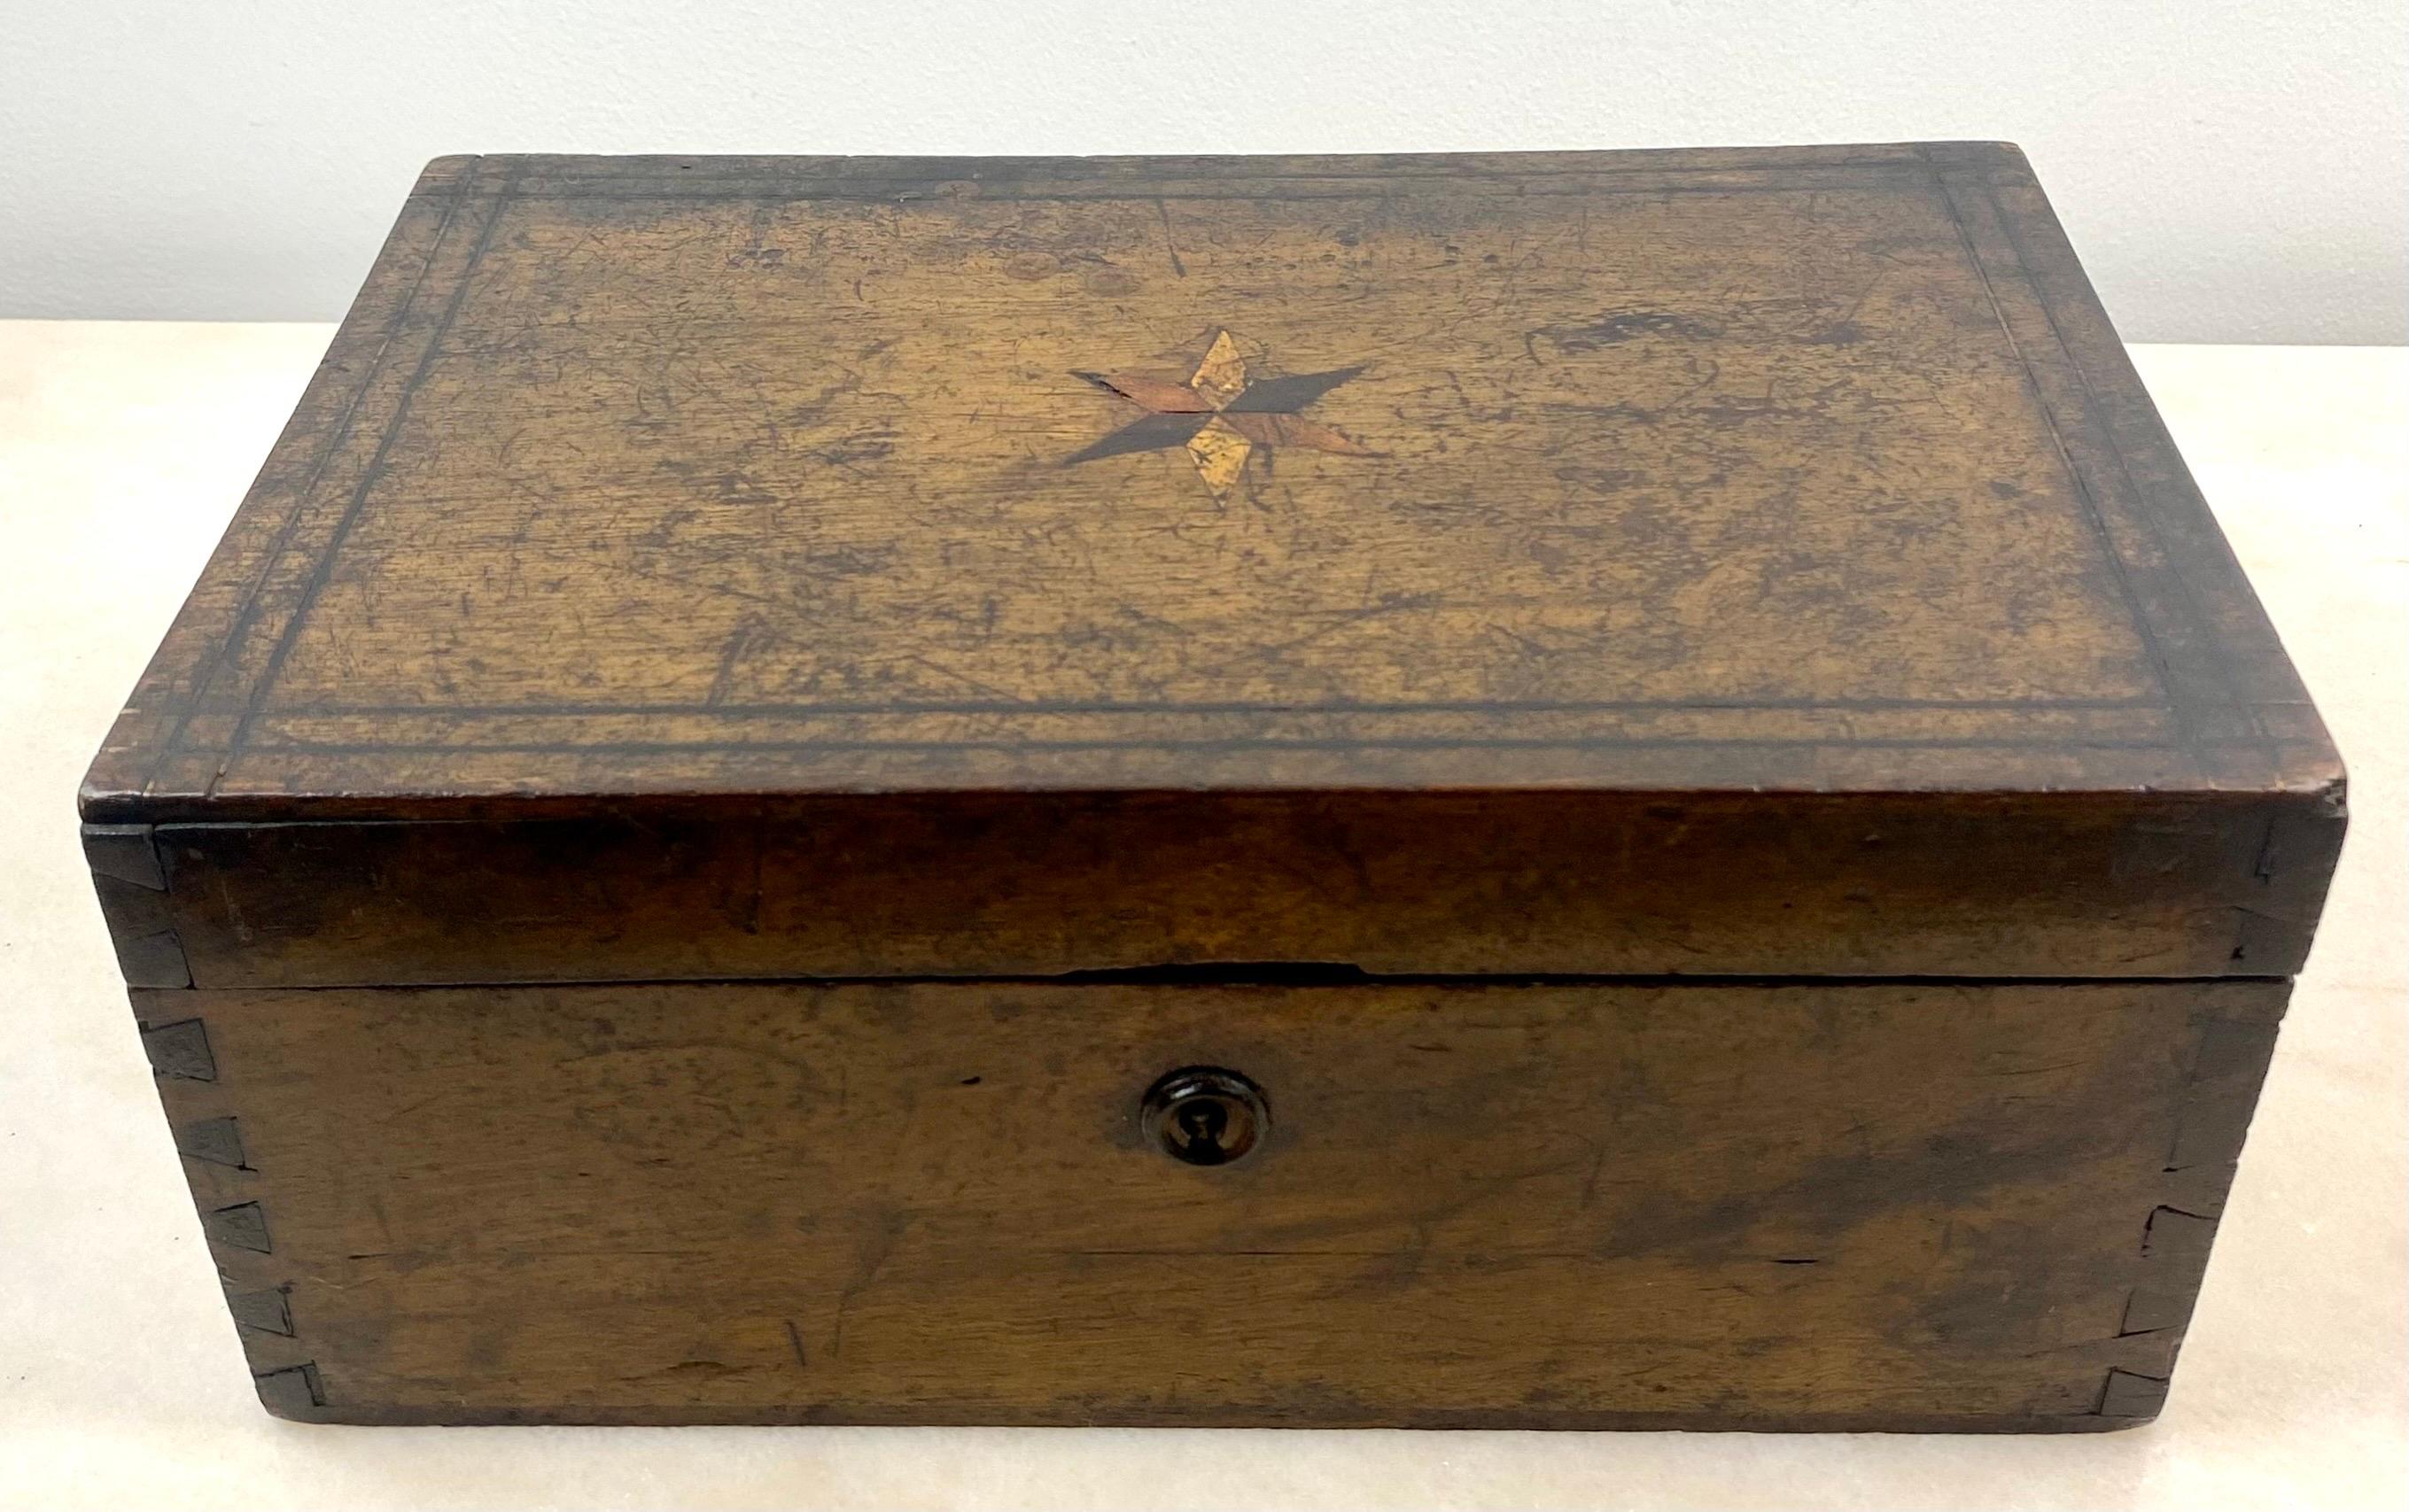 Beautiful jewelry box, tea box, storage box, document box in inlaid oak wood.
Marquetry medallion in the shape of a 6-pointed star. One of the branches of the star has a slight defect due to time and probably to the use of the box.
19th century -